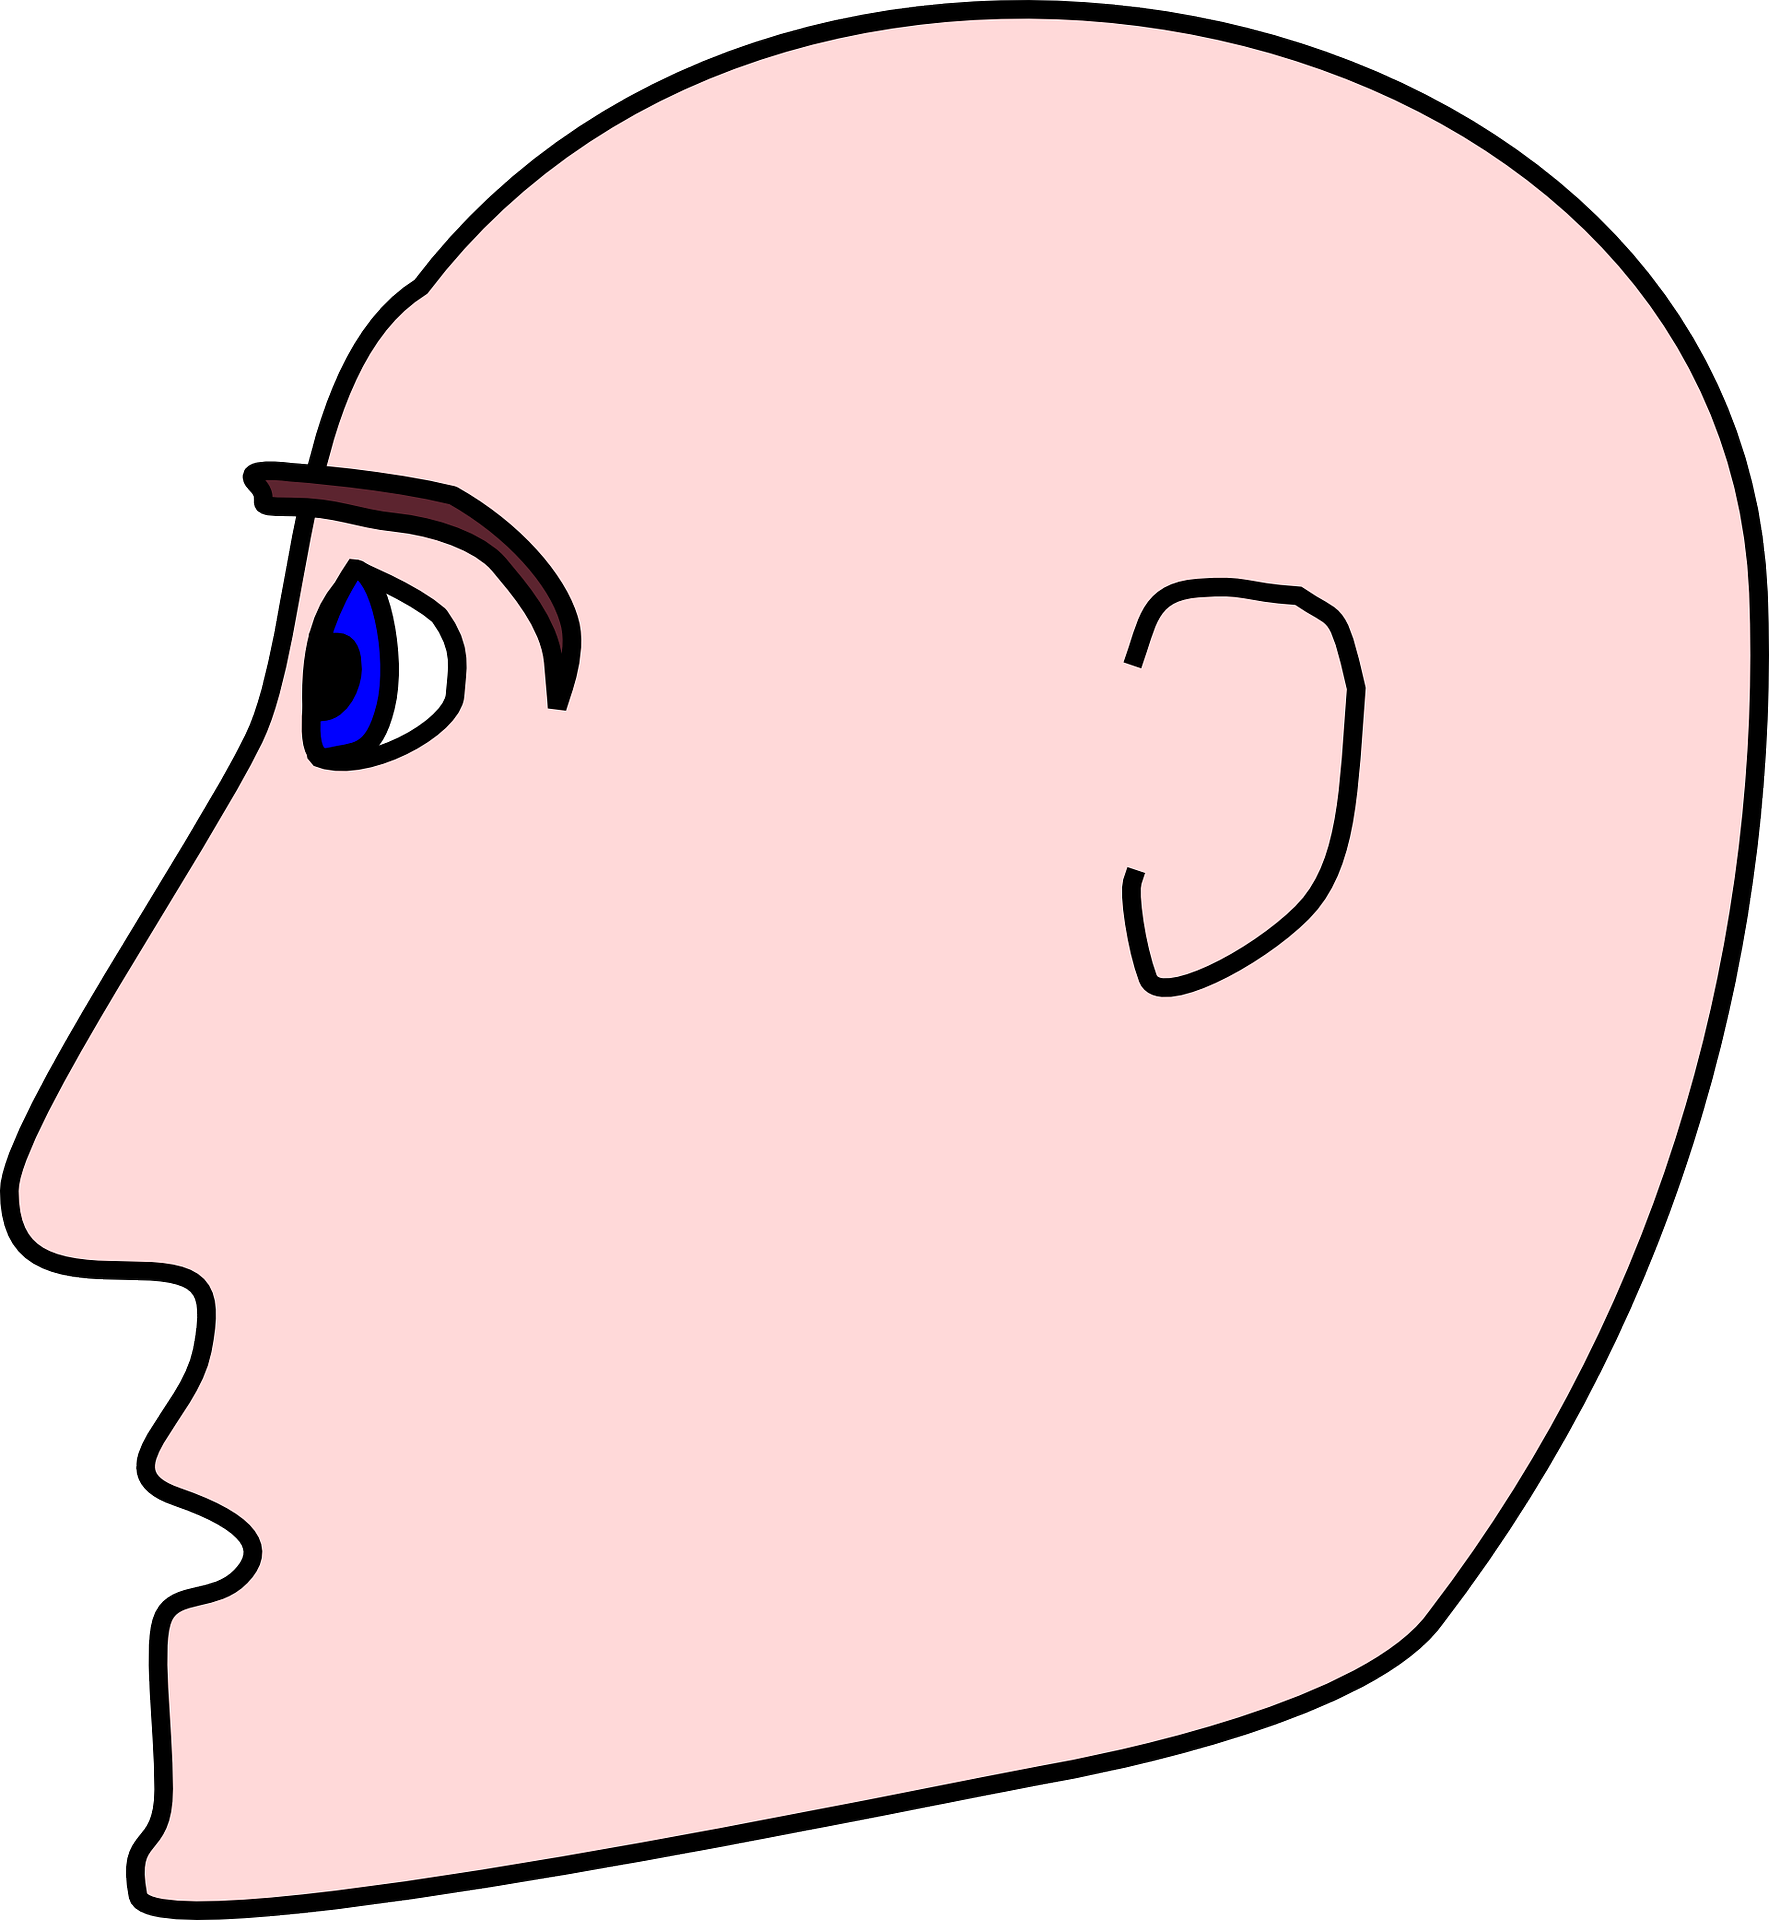 Bald head drawing free image download